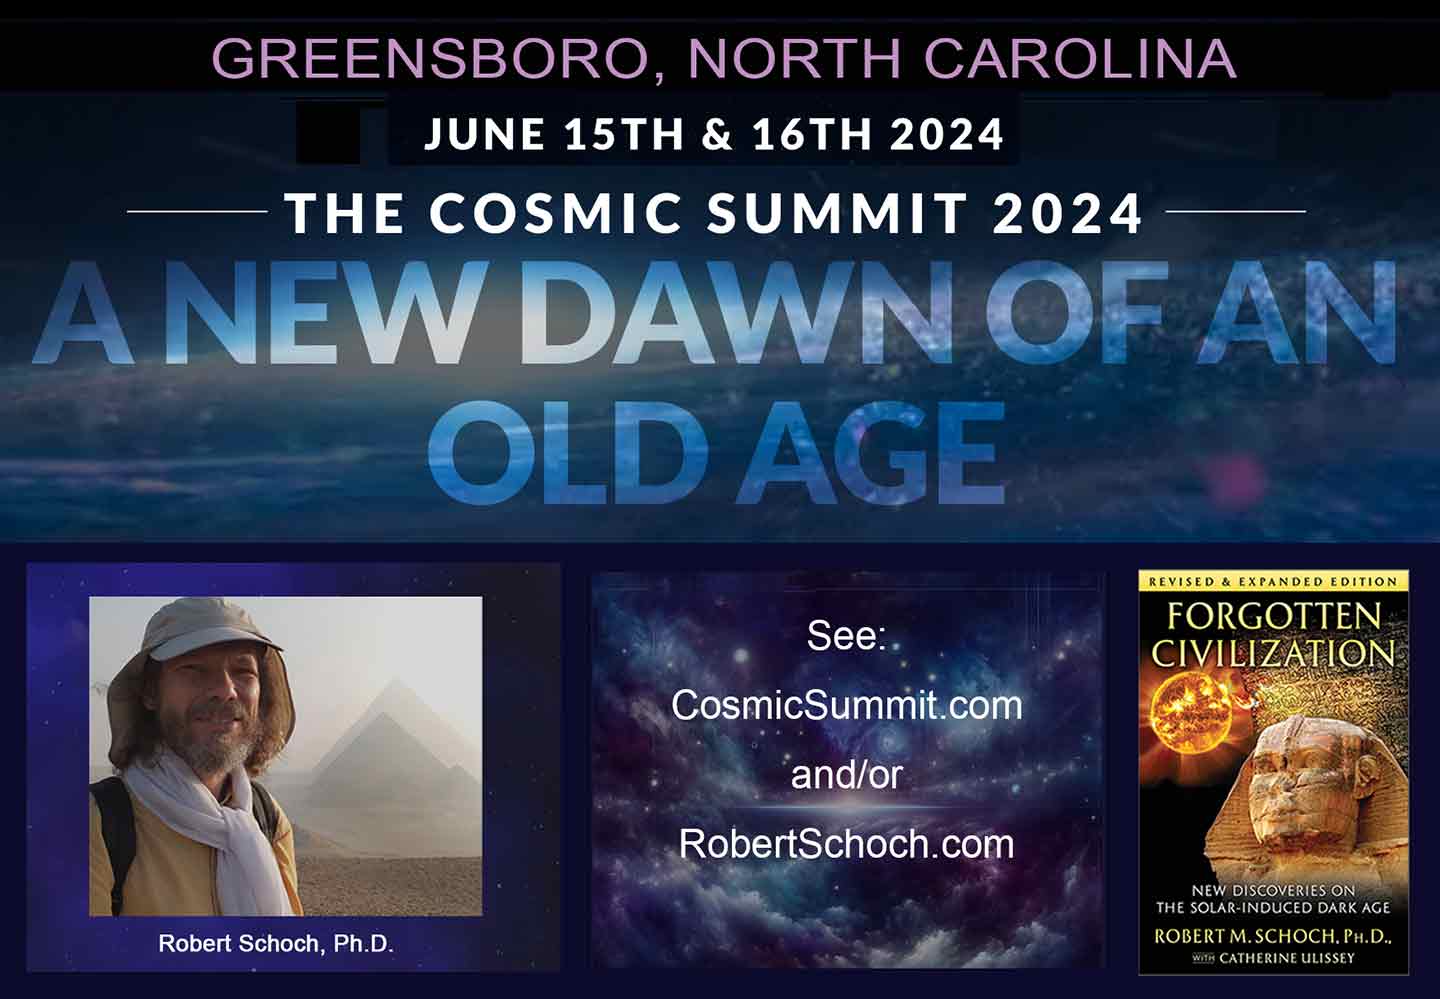 Poster for the Cosmic Summit conference in 2024